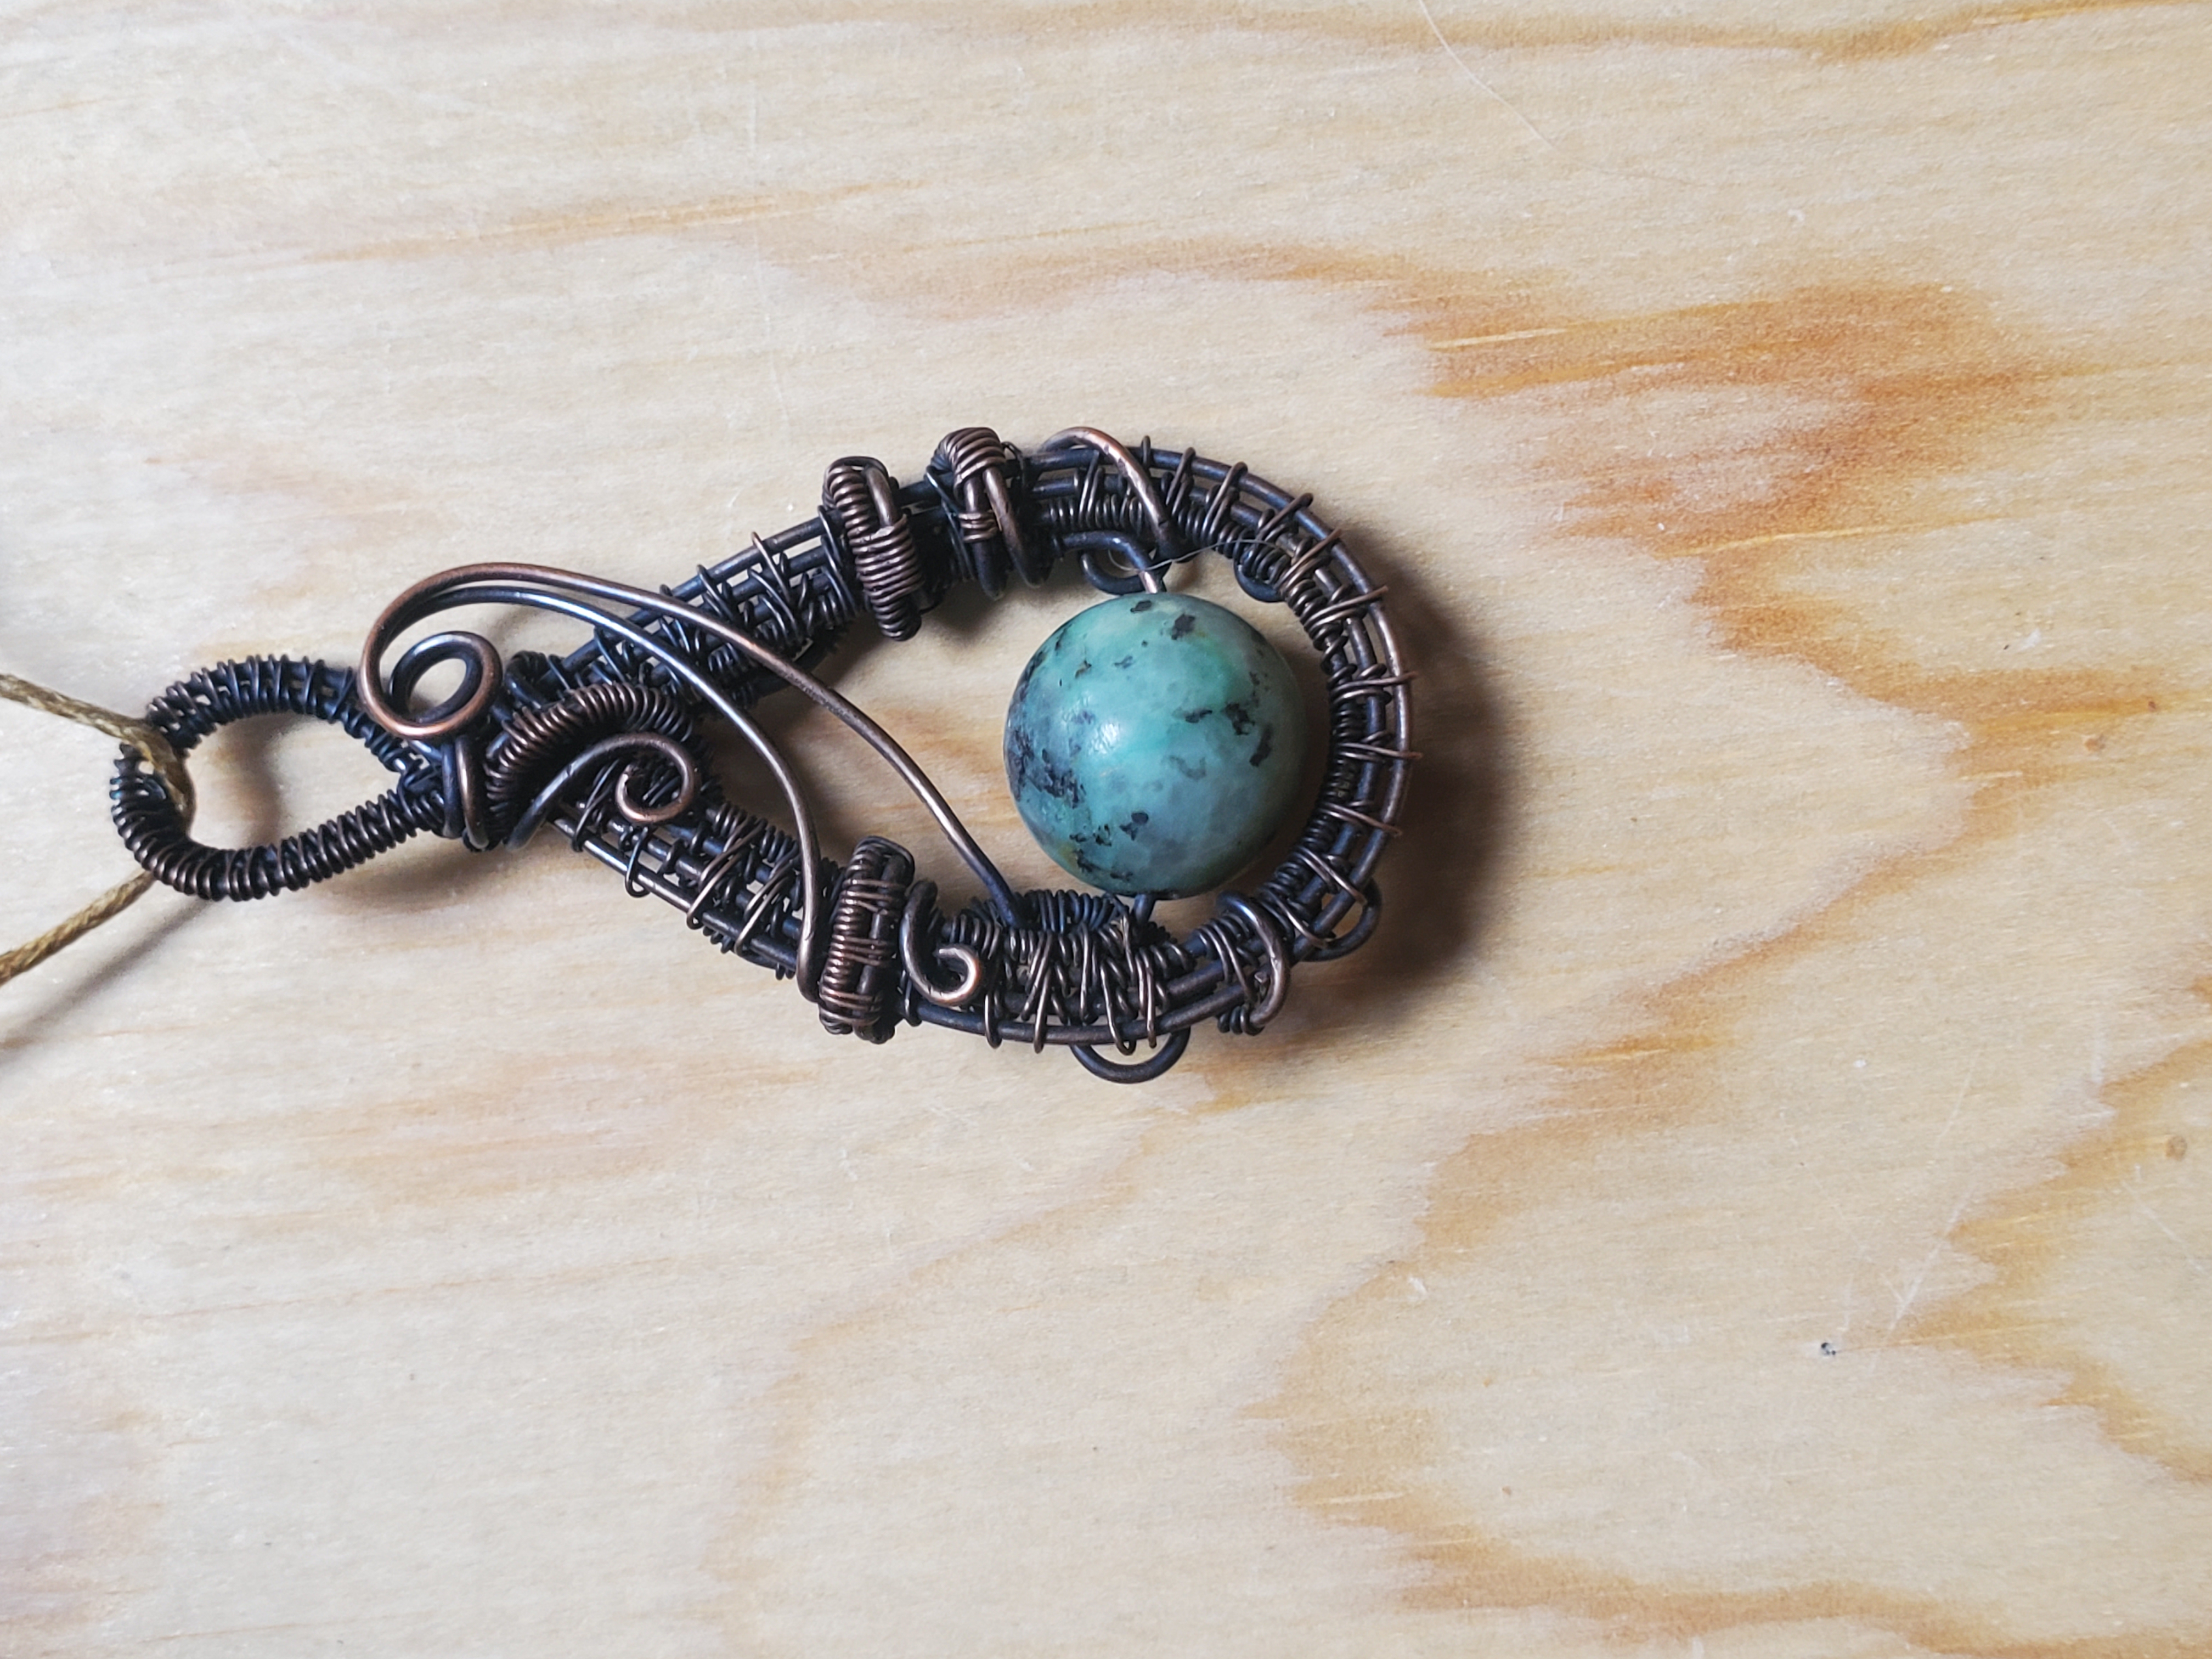 African Turquoise, pendant, necklace, healing, gifts, stone jewelry, wire wrapped